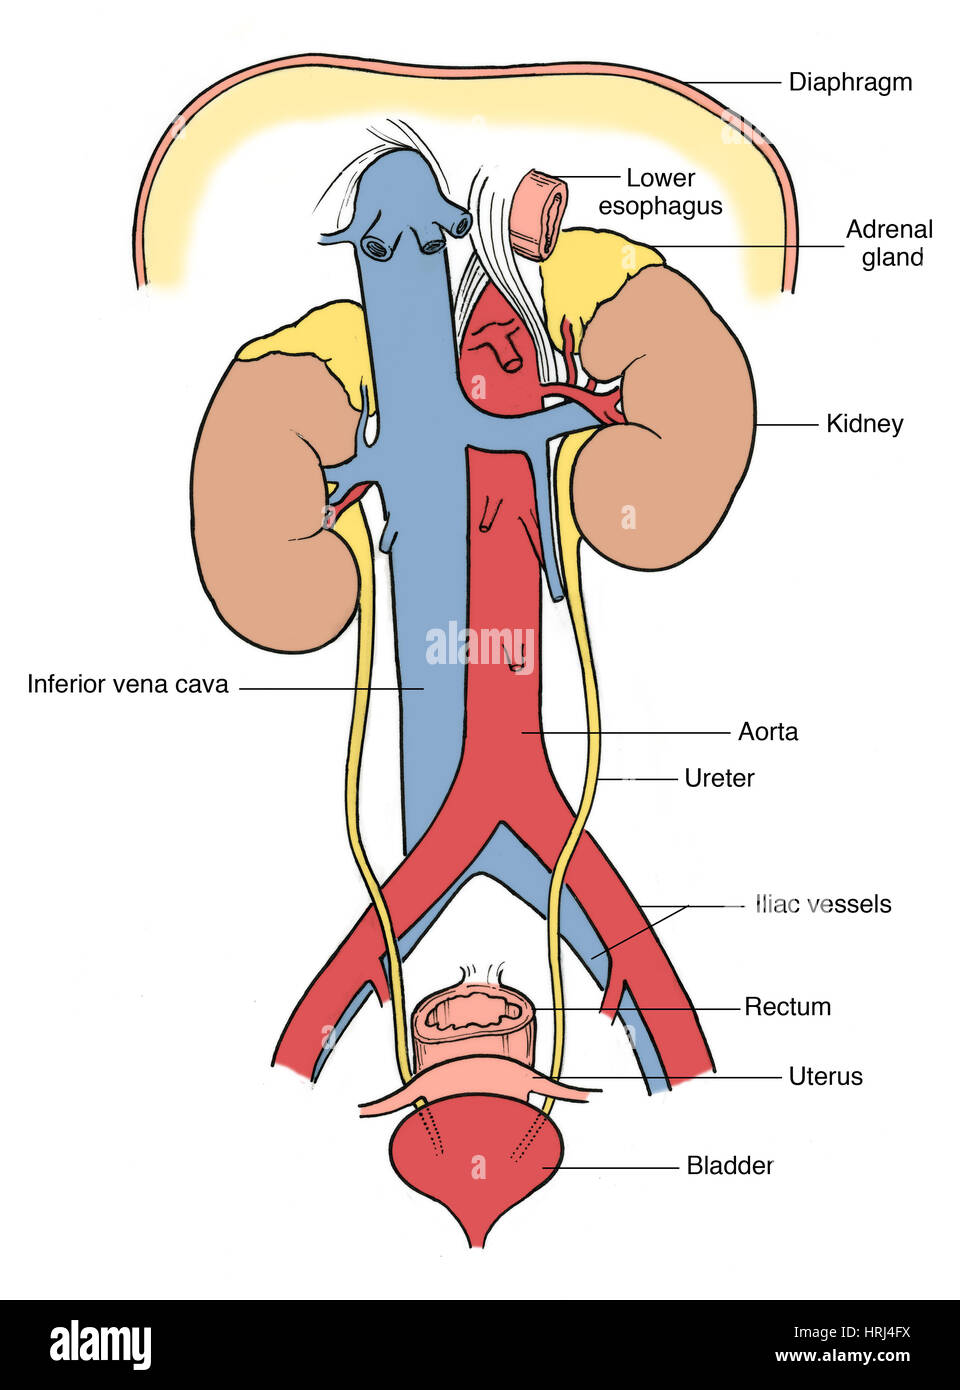 Urinary System Anatomy Doodle Style Sketch Stock Vector (Royalty Free)  332549015 | Shutterstock